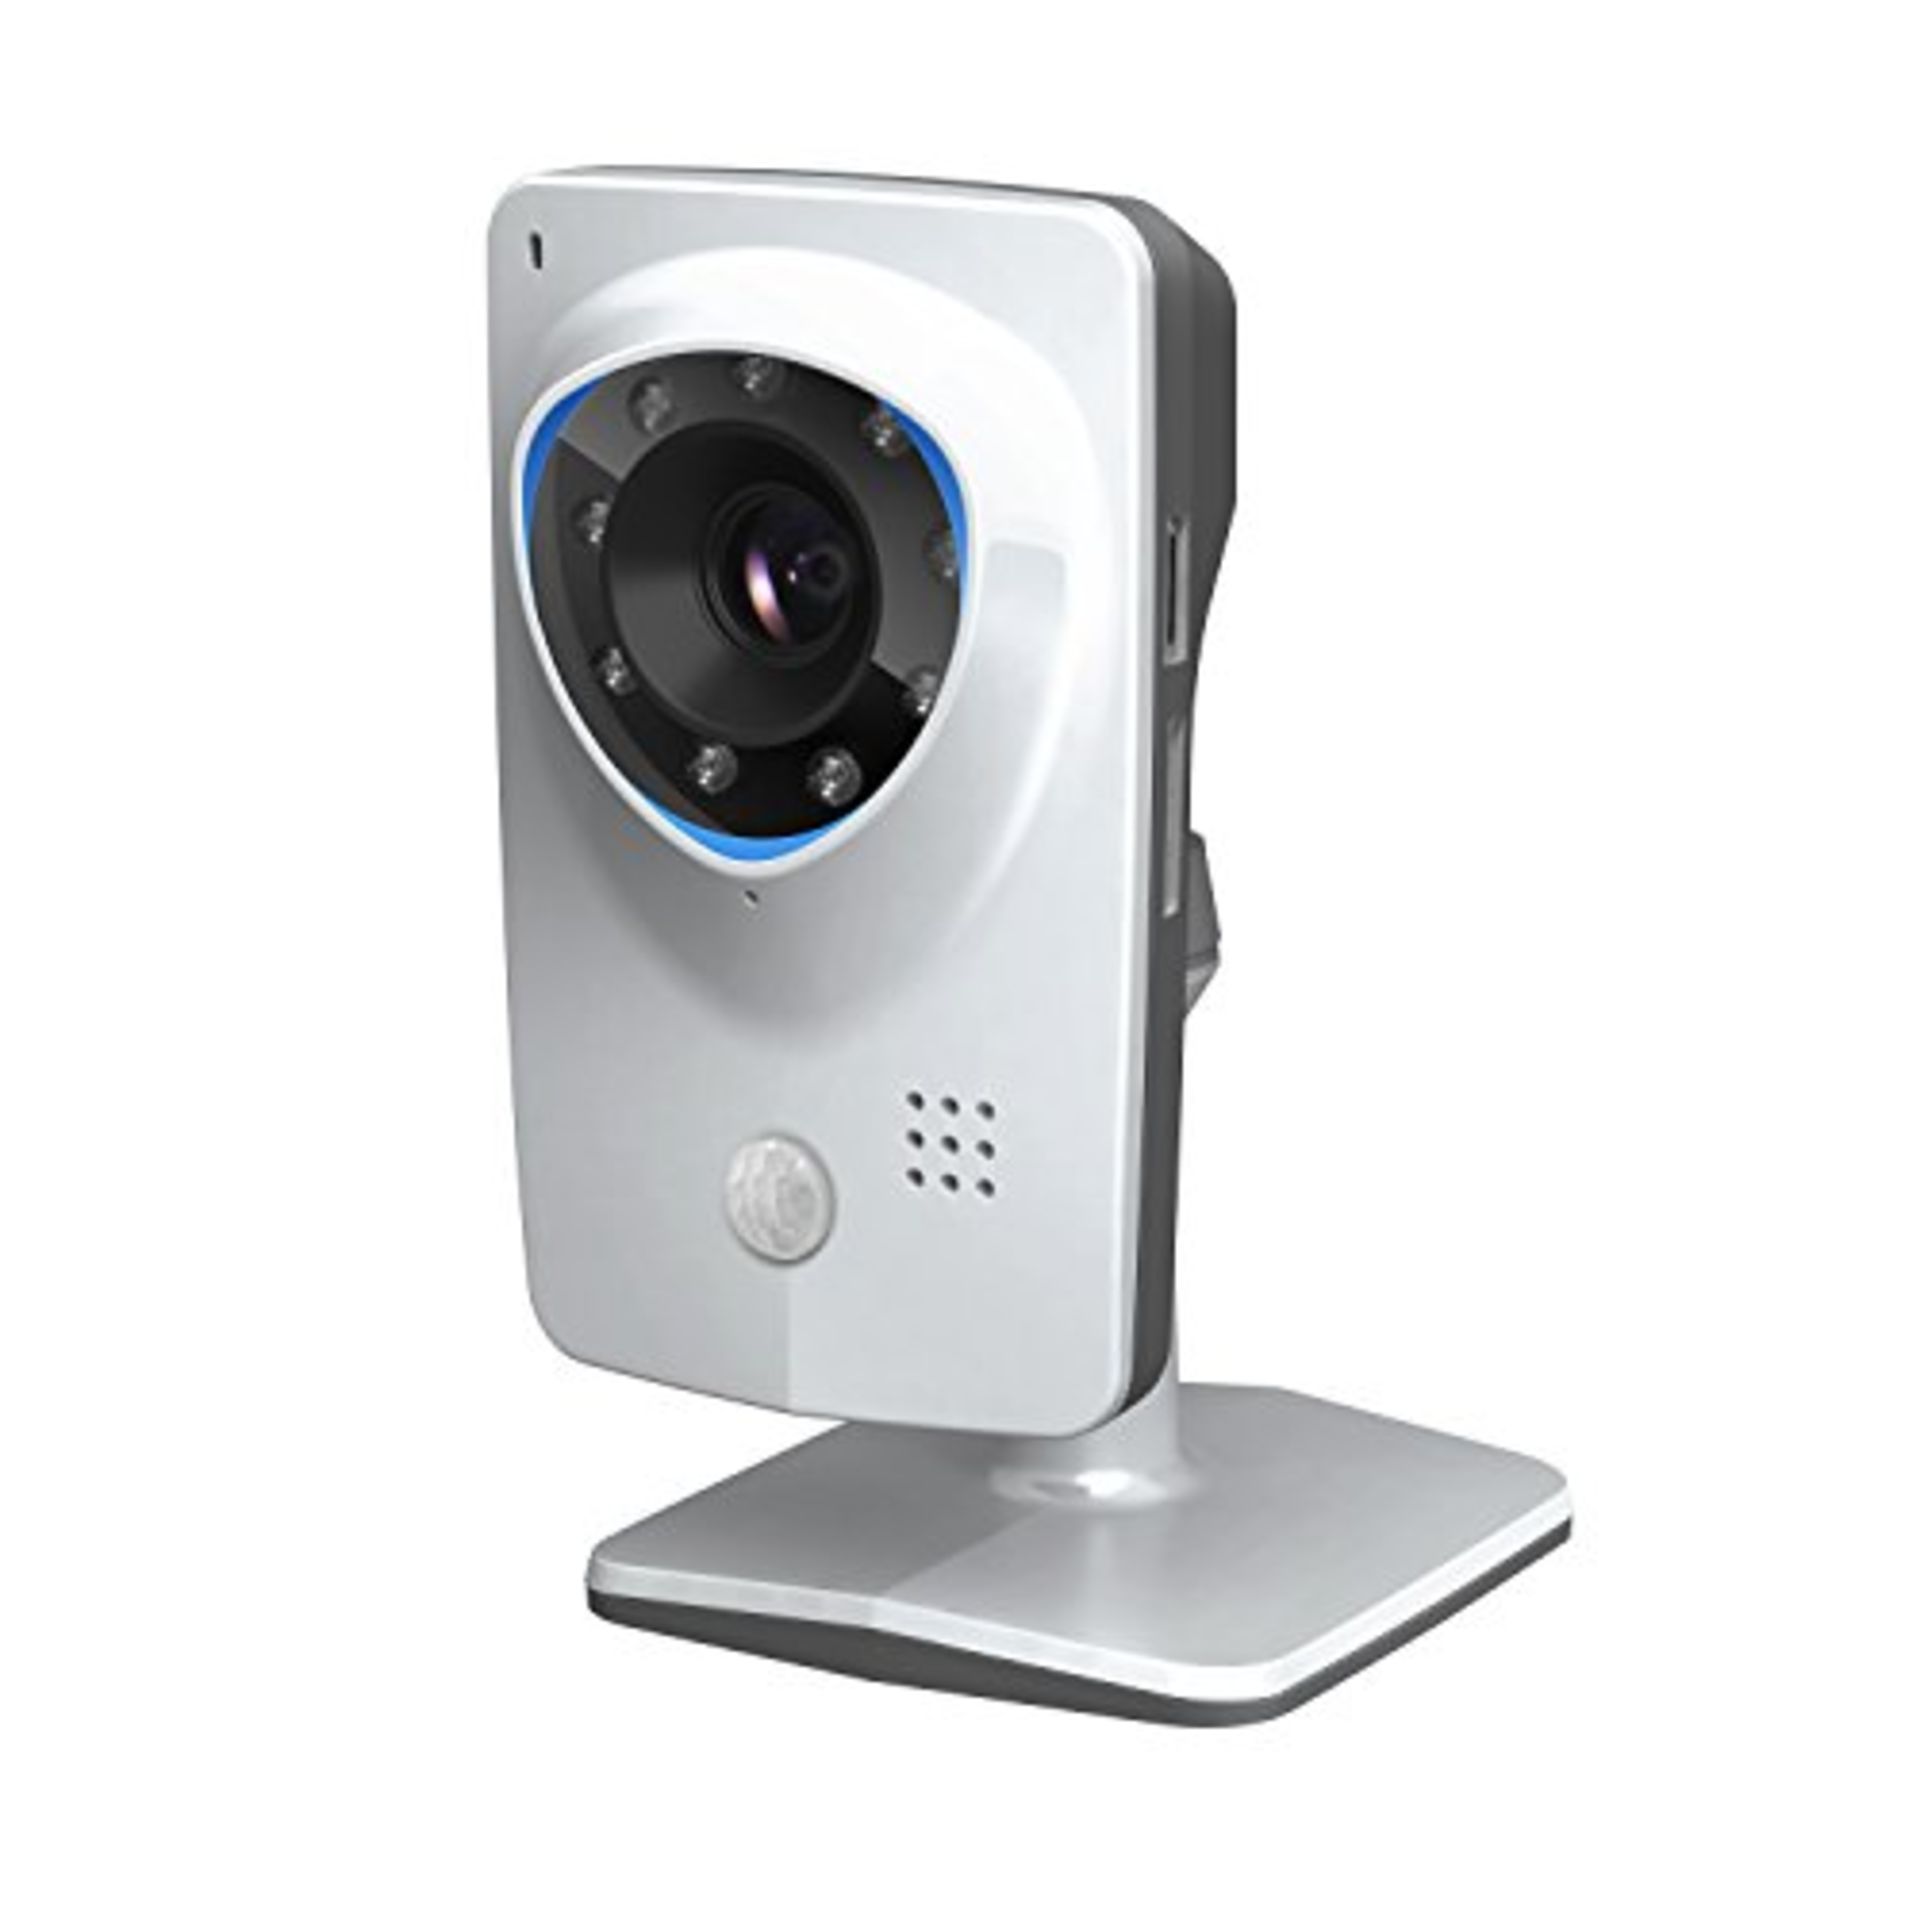 V *TRADE QTY* Grade A Swann Cloud HD Plug & Play Wifi Security Camera With Smart Alerts - Facial